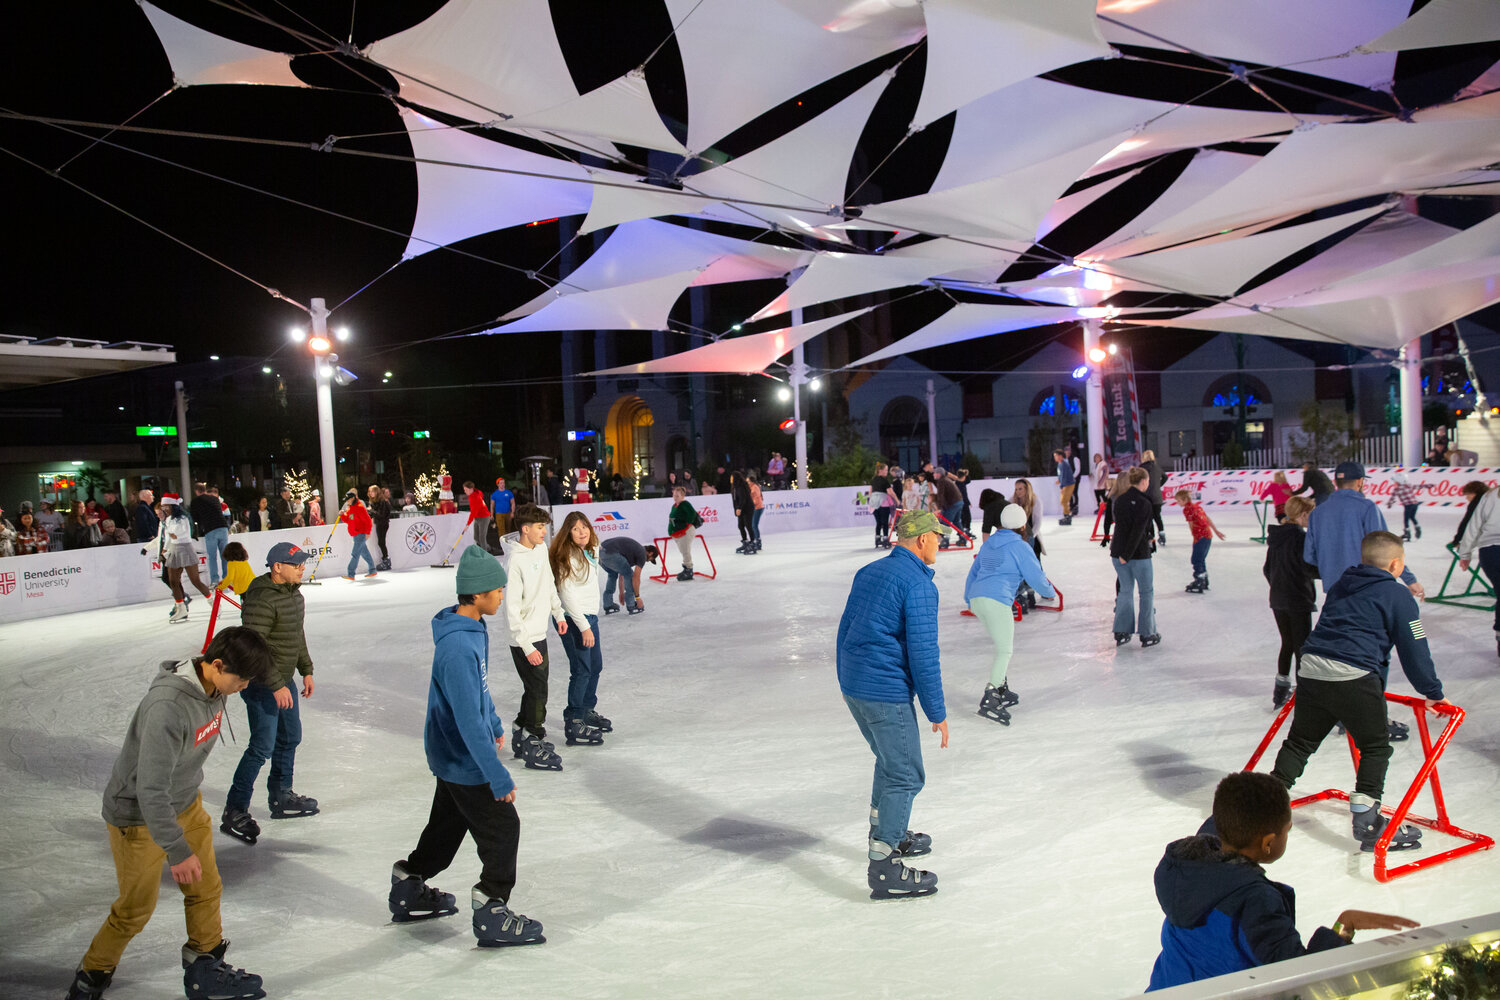 The Winter Wonderland Ice Rink in downtown Mesa features a 6,005-square-foot ice skating rink at the Plaza at Mesa City Center, 56 E. Main St. The Winter Wonderland Ice Rink will open daily for thousands to enjoy the winter weather while gliding on the ice under the stars. There is limited walk-up ticket availability so online reservations are recommended. To purchase passes, go to merrymainst.com/icerink.